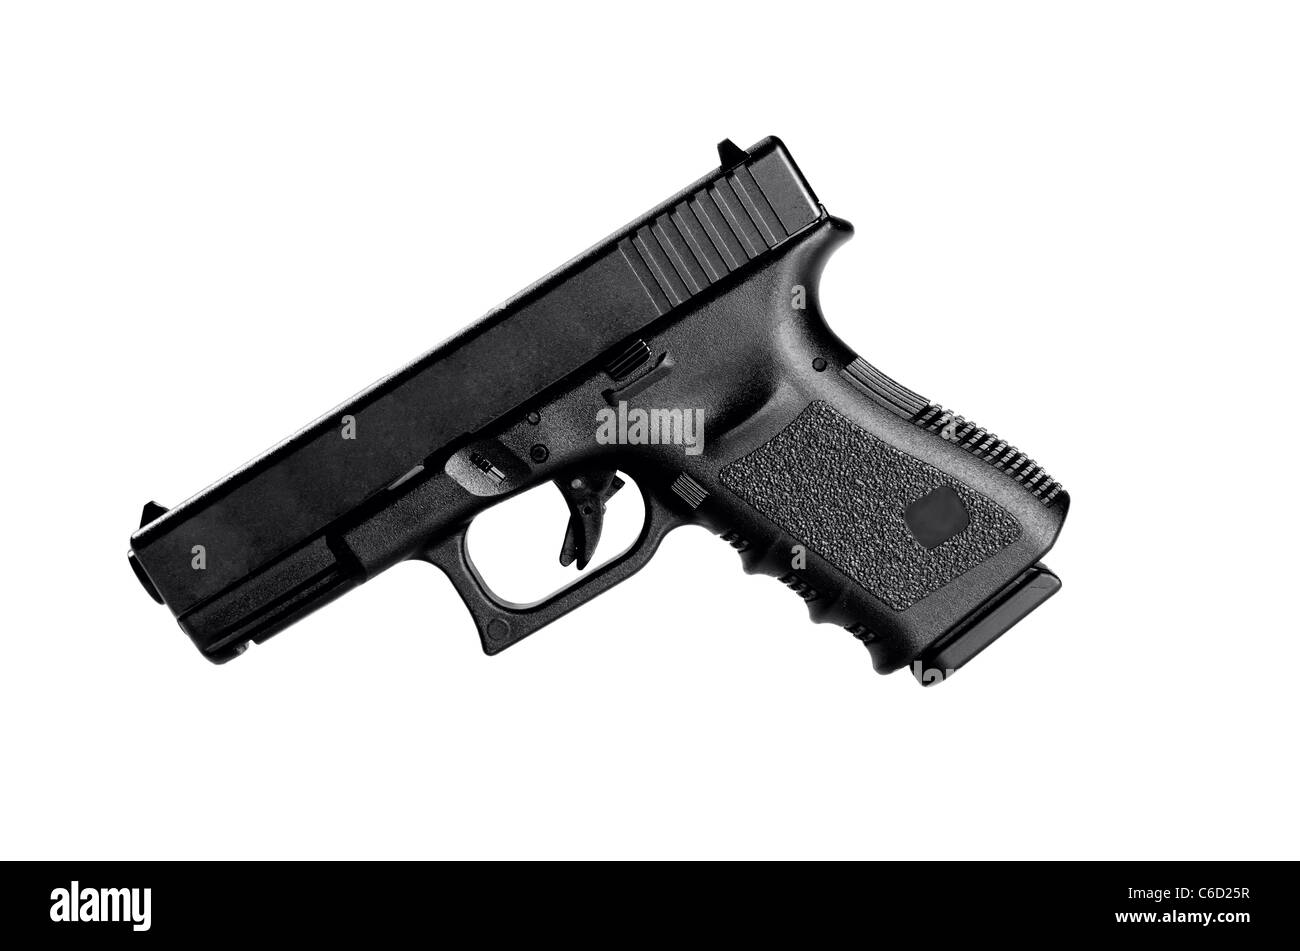 Image of a 40 caliber handgun on a white background Stock Photo